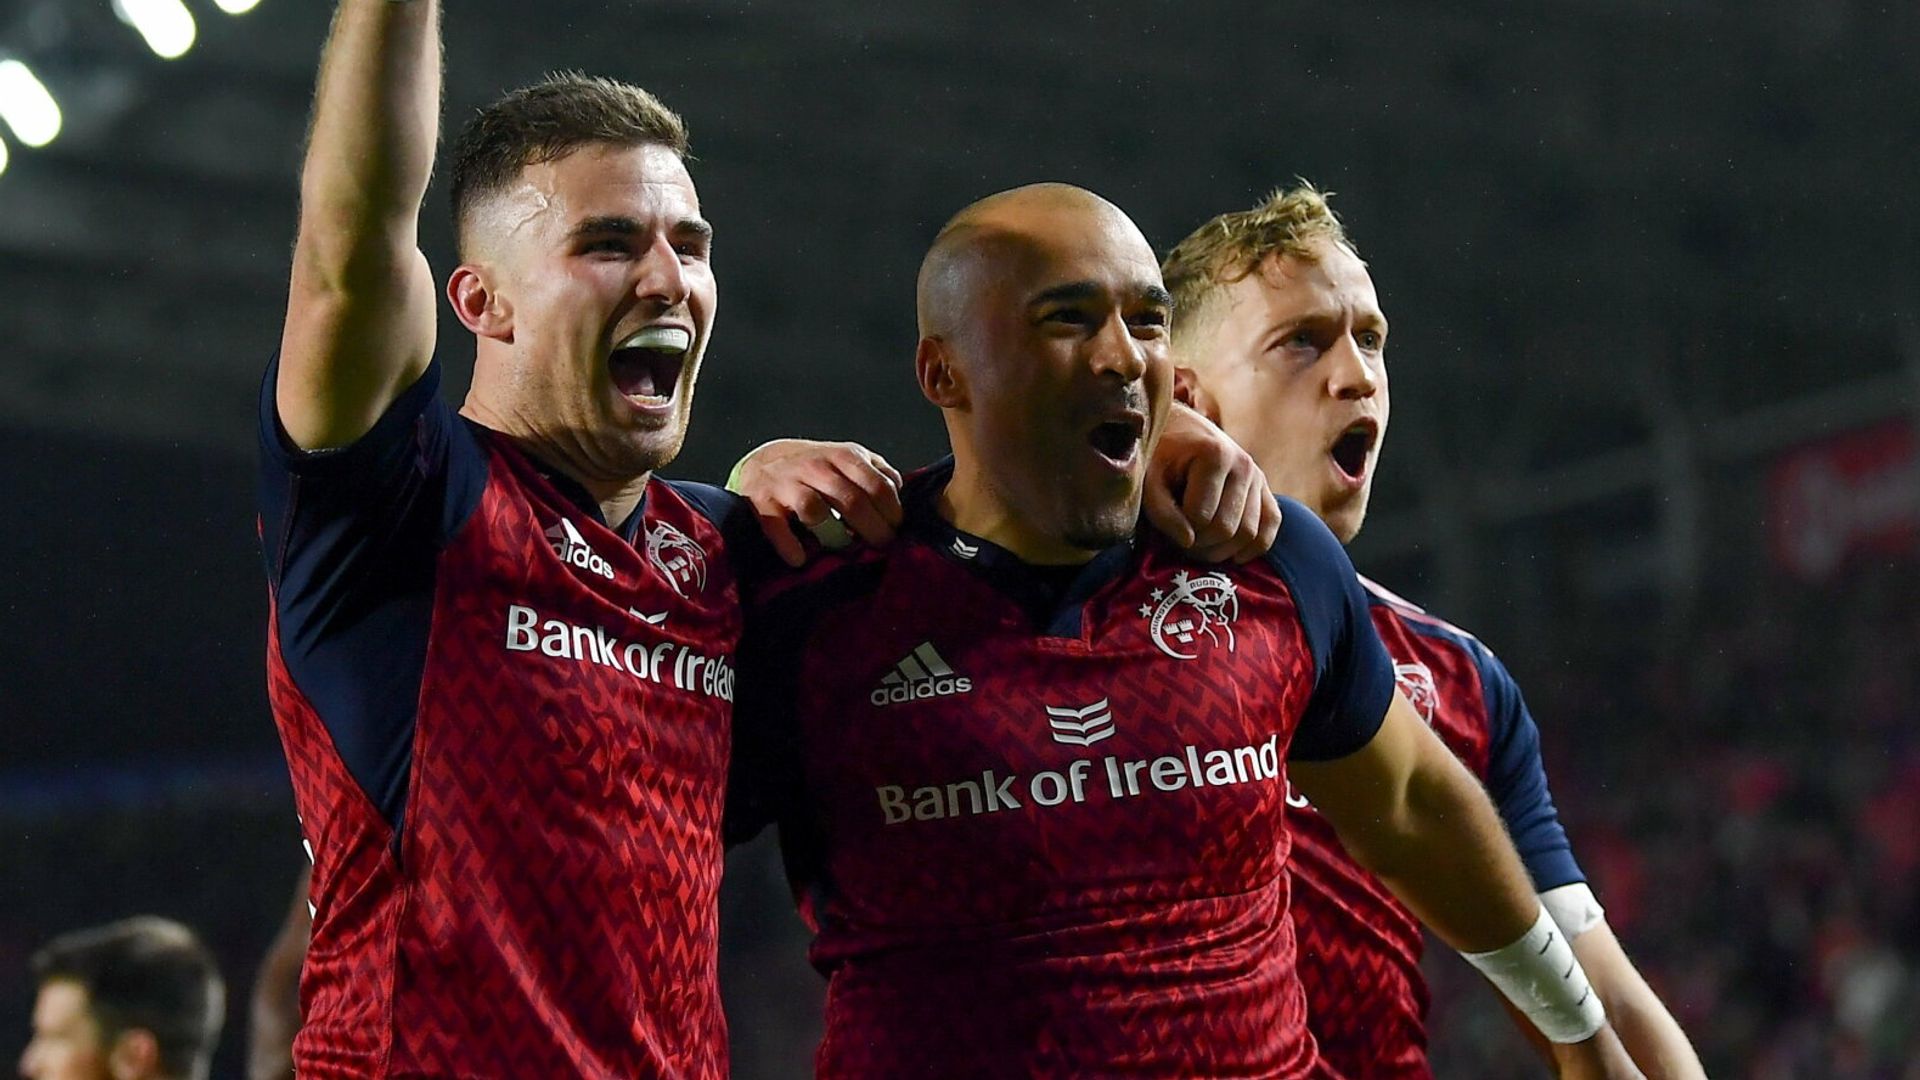 Sensational Munster post historic win vs South Africa at Pairc Ui Chaoimh